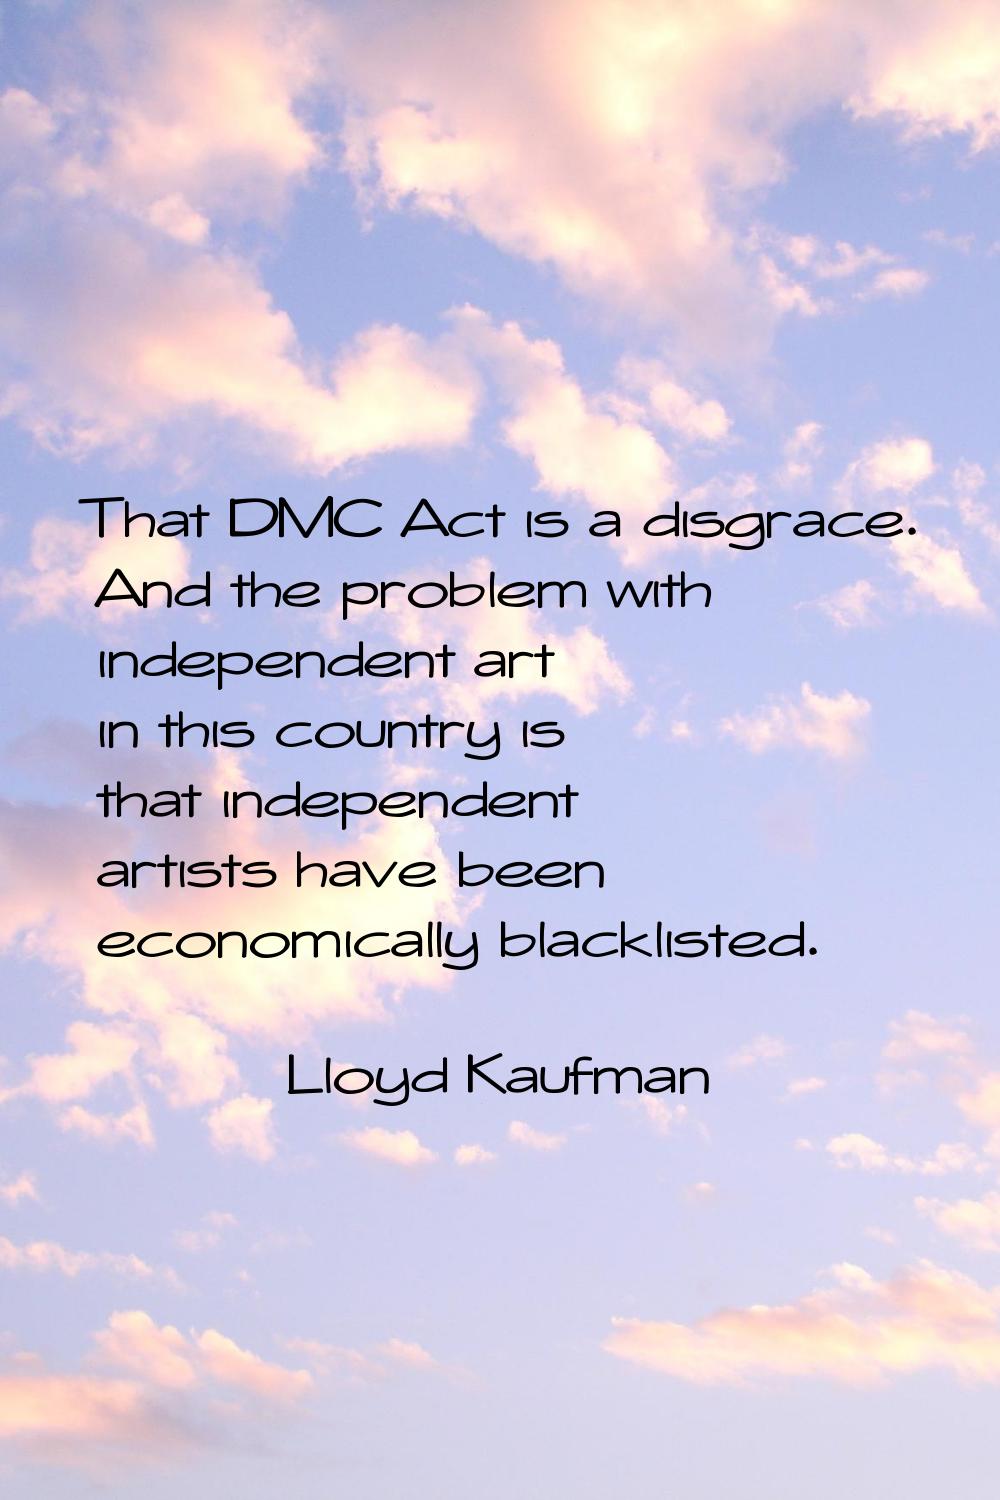 That DMC Act is a disgrace. And the problem with independent art in this country is that independen